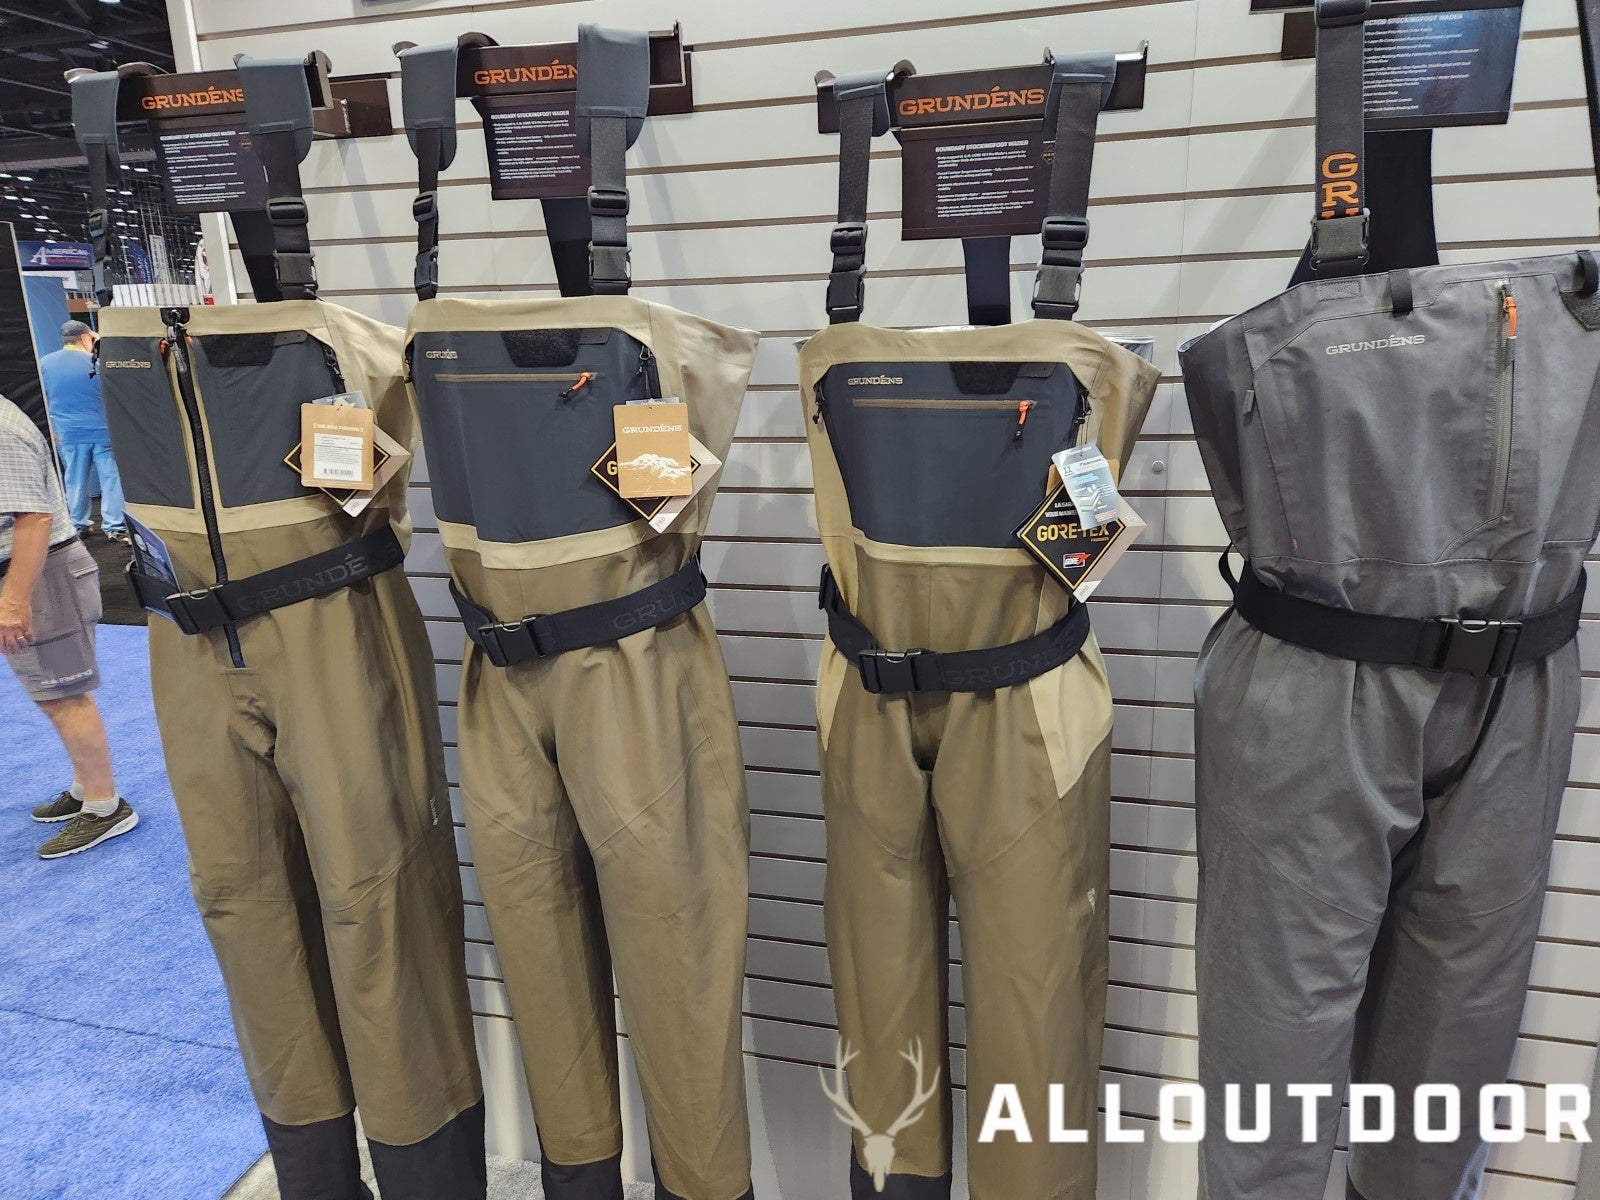 [ICAST 2023] New Boundary Zip Stockingfoot Wader from Grundens